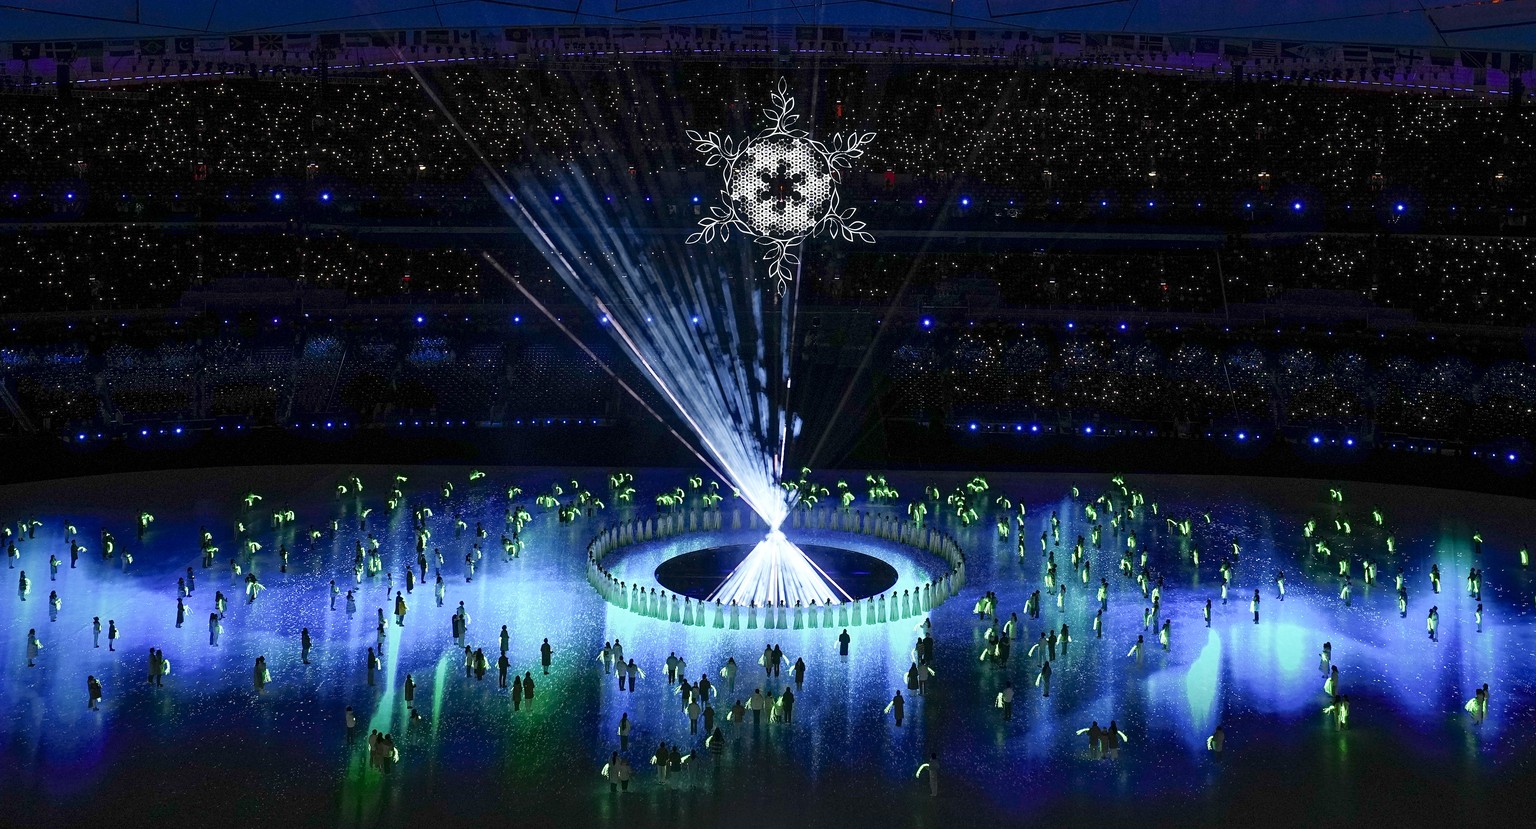 Performers participate during the closing ceremony of the 2022 Winter Olympics, Sunday, Feb. 20, 2022, in Beijing. (AP Photo/Brynn Anderson)